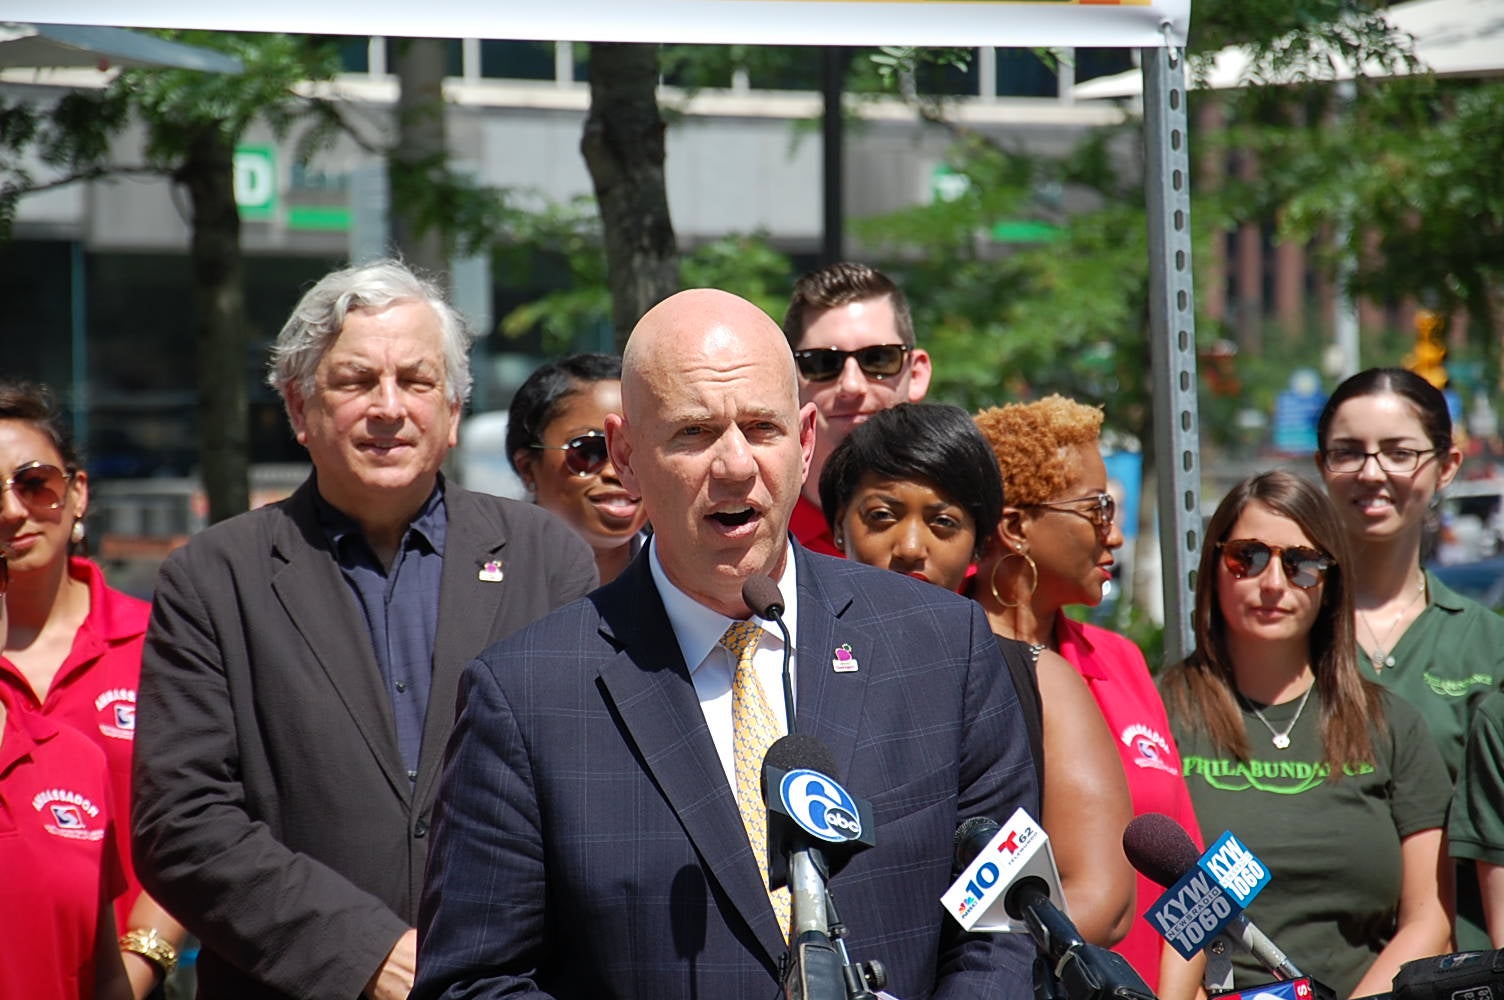 SEPTA general manager Jeff Knueppel announces that the transit agency will not raise its fare this year. (Tom MacDonald/WHYY)